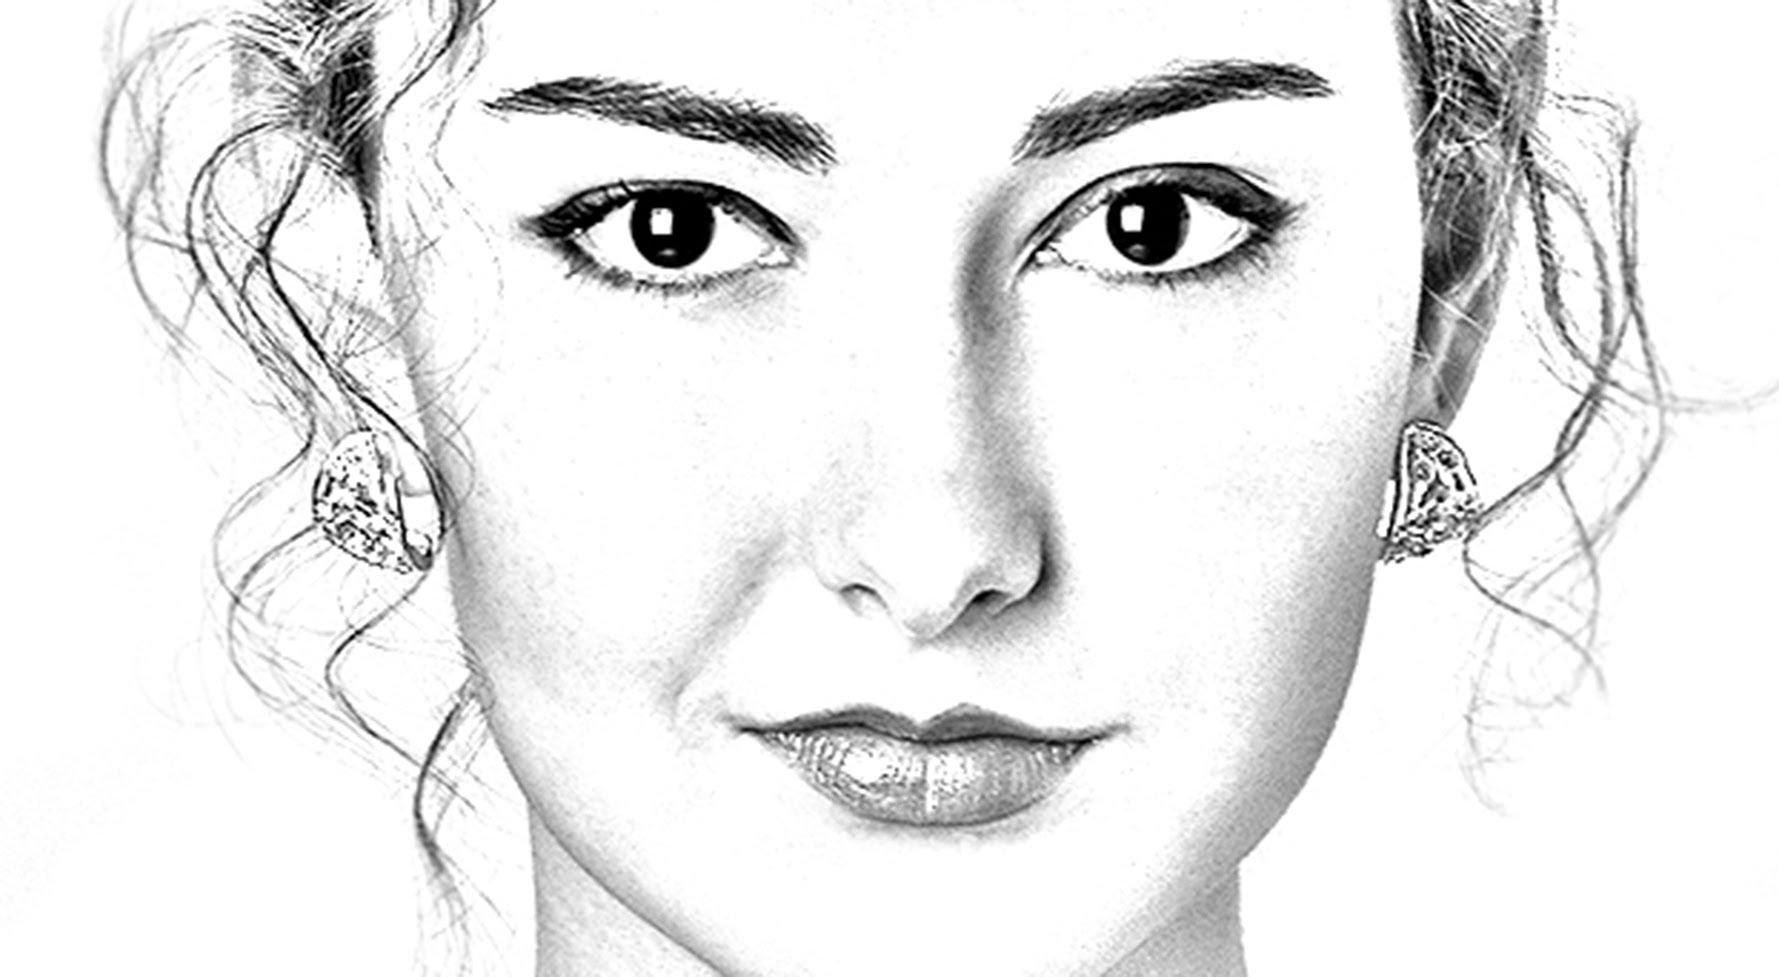 Simple How To Turn A Photo Into A Sketch Drawing Photoshop with Pencil